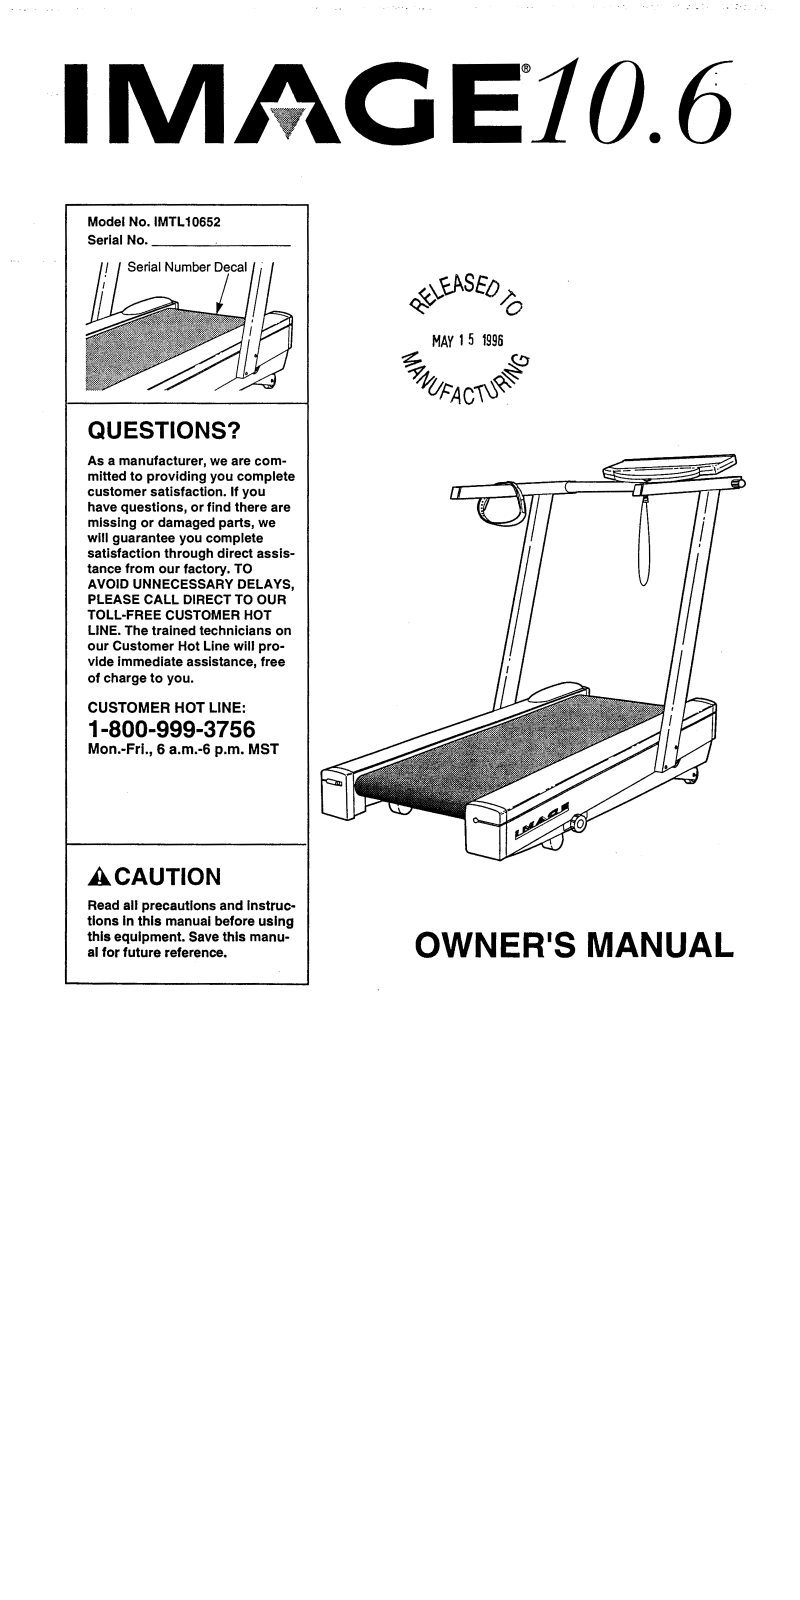 Image IMTL10652 Owner's Manual